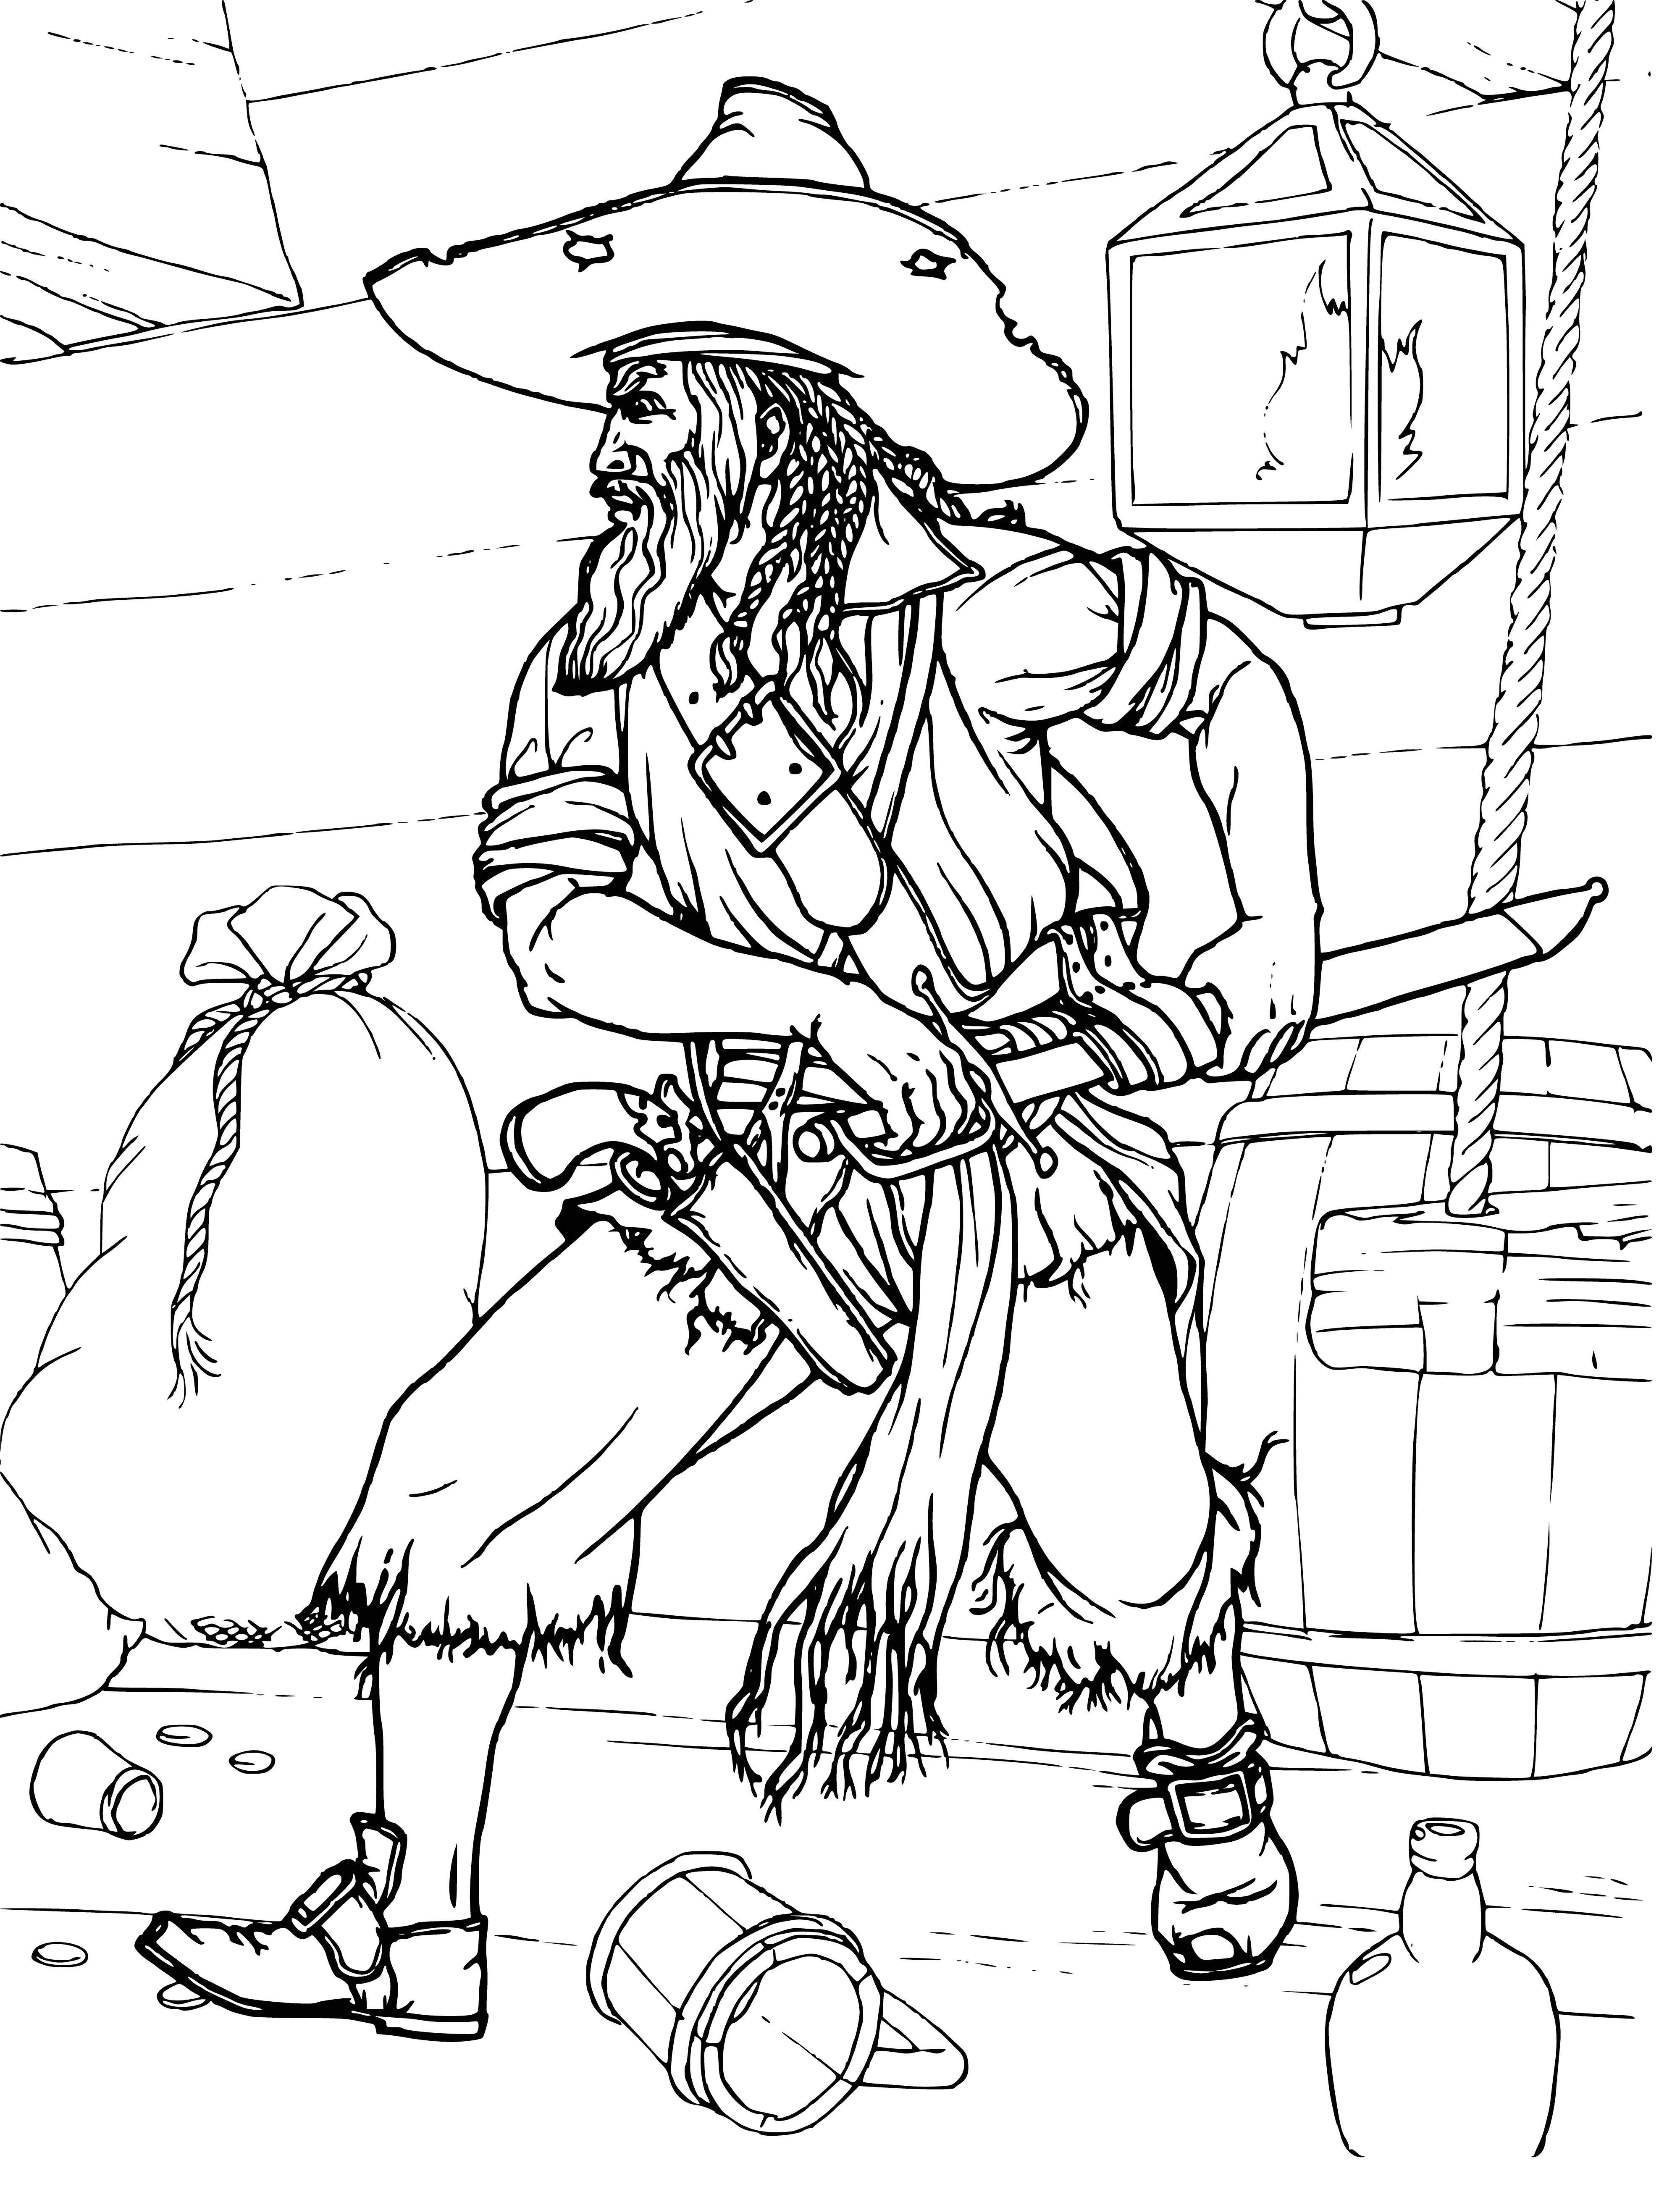 coloring page: An old pirate, missing teeth & a boot, leans on his cane, gesturing threateningly & wearing a tattered bandana & scarf.